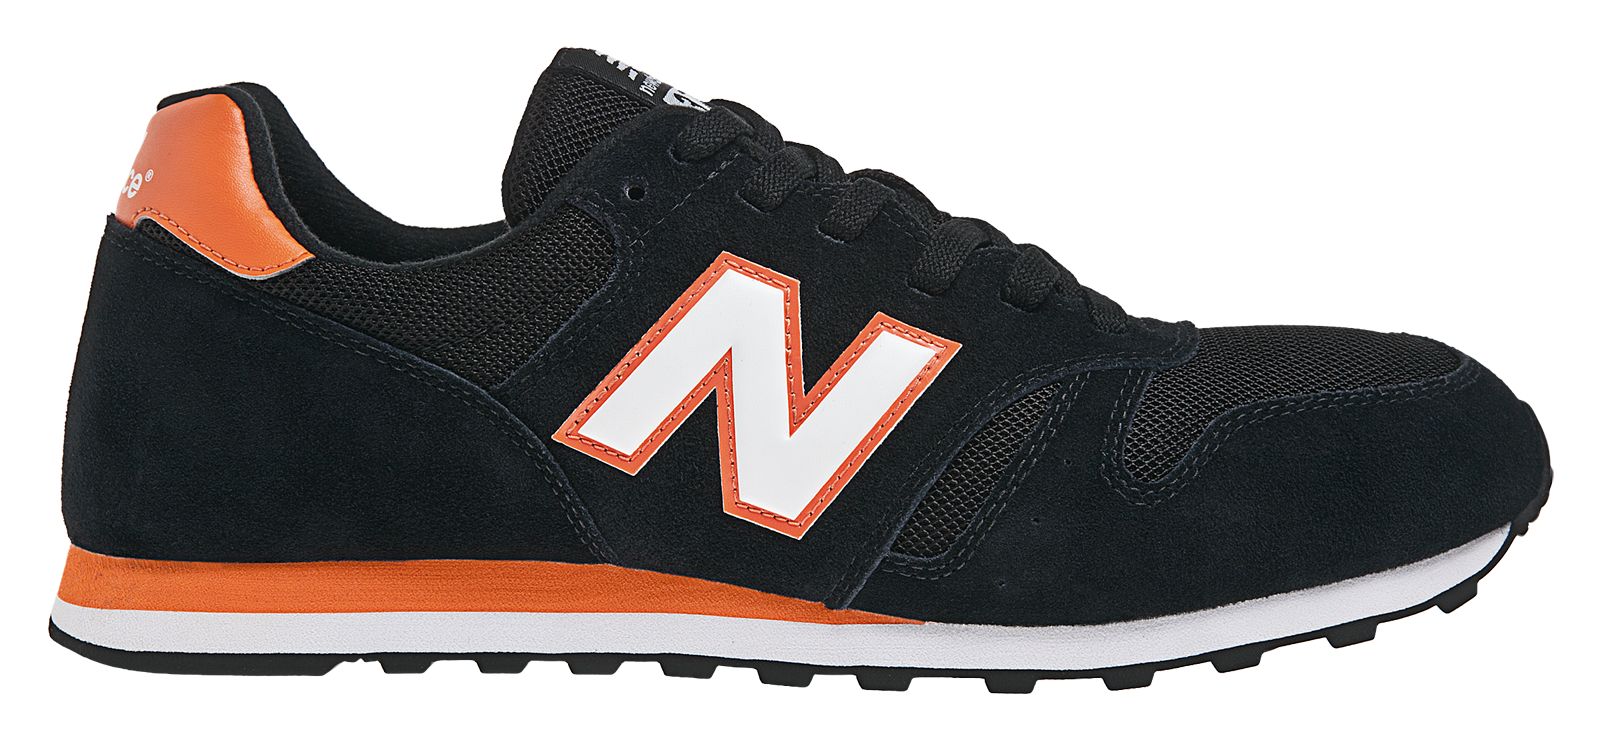 New Balance M373 on Sale - Discounts Up to 20% Off on M373SKG at Joe's New  Balance Outlet